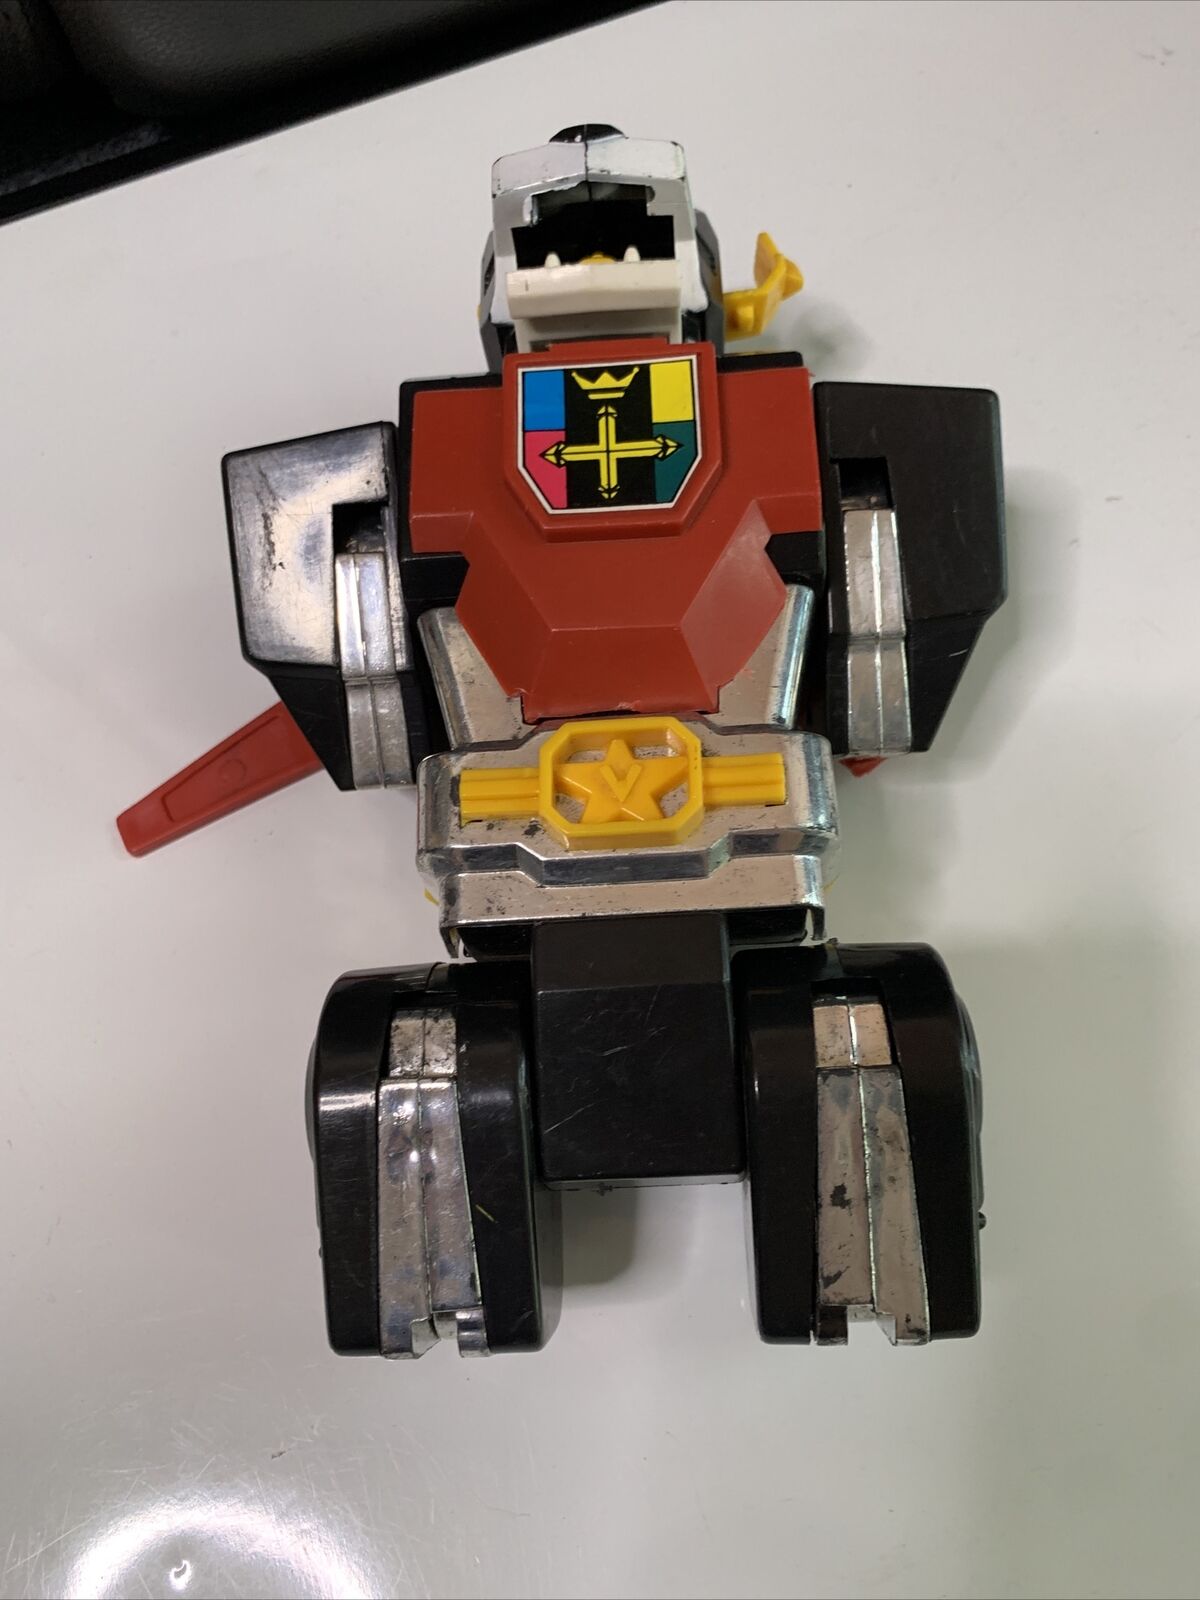 Vintage Voltron Toy - Body only